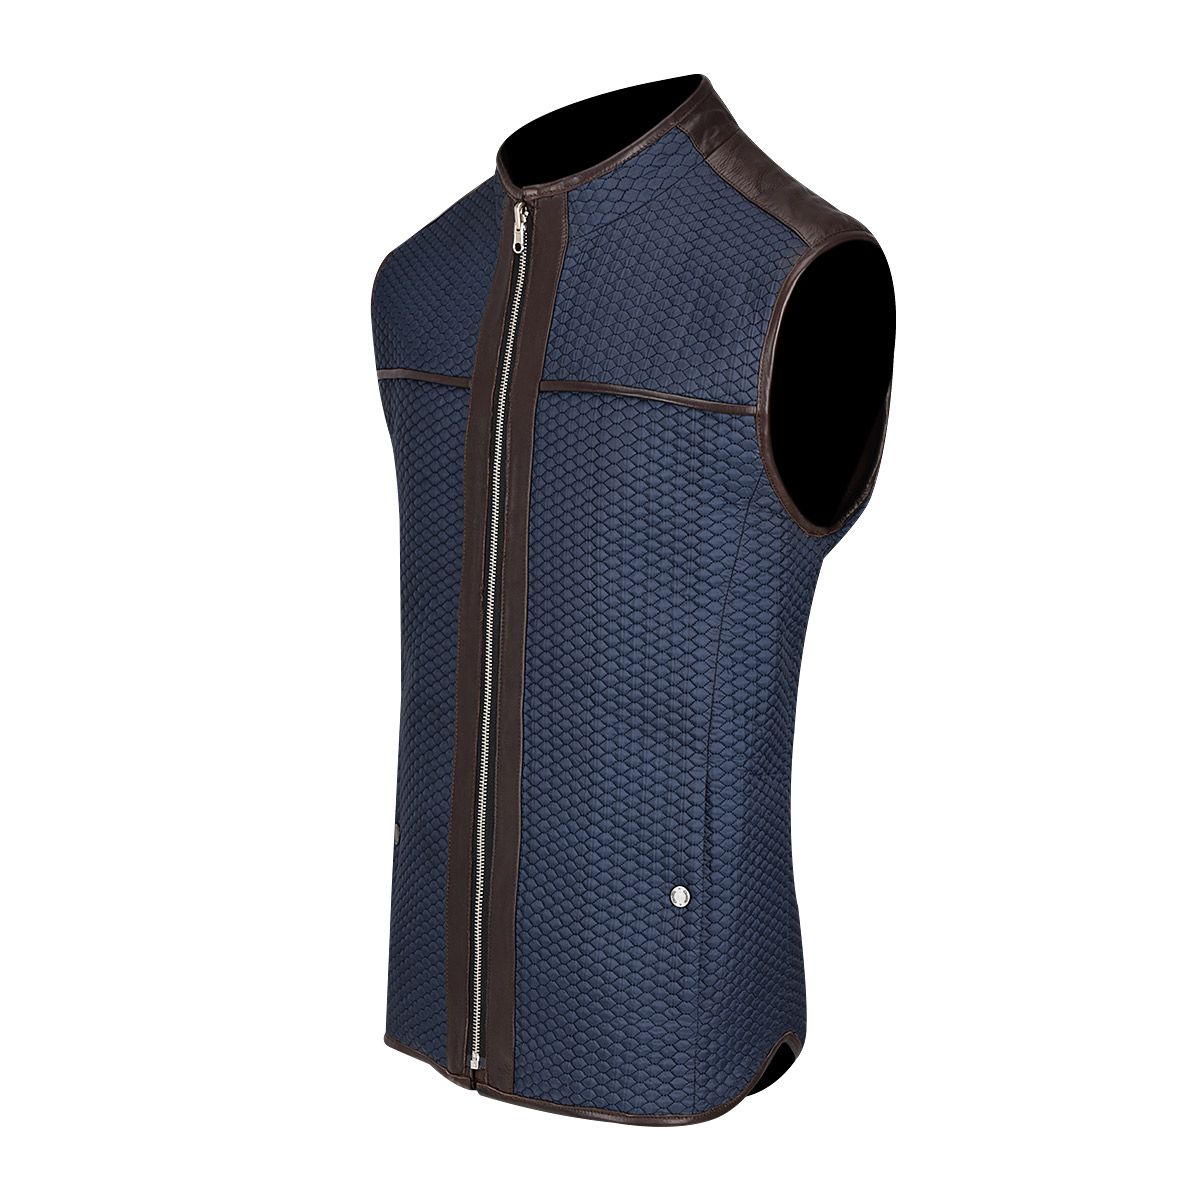 H303COC - Cuadra brown casual fashion reversible lambskin leather vest for men-Kuet.us - Cuadra Boots - Western Cowboy, Casual Fashion and Dress Boots